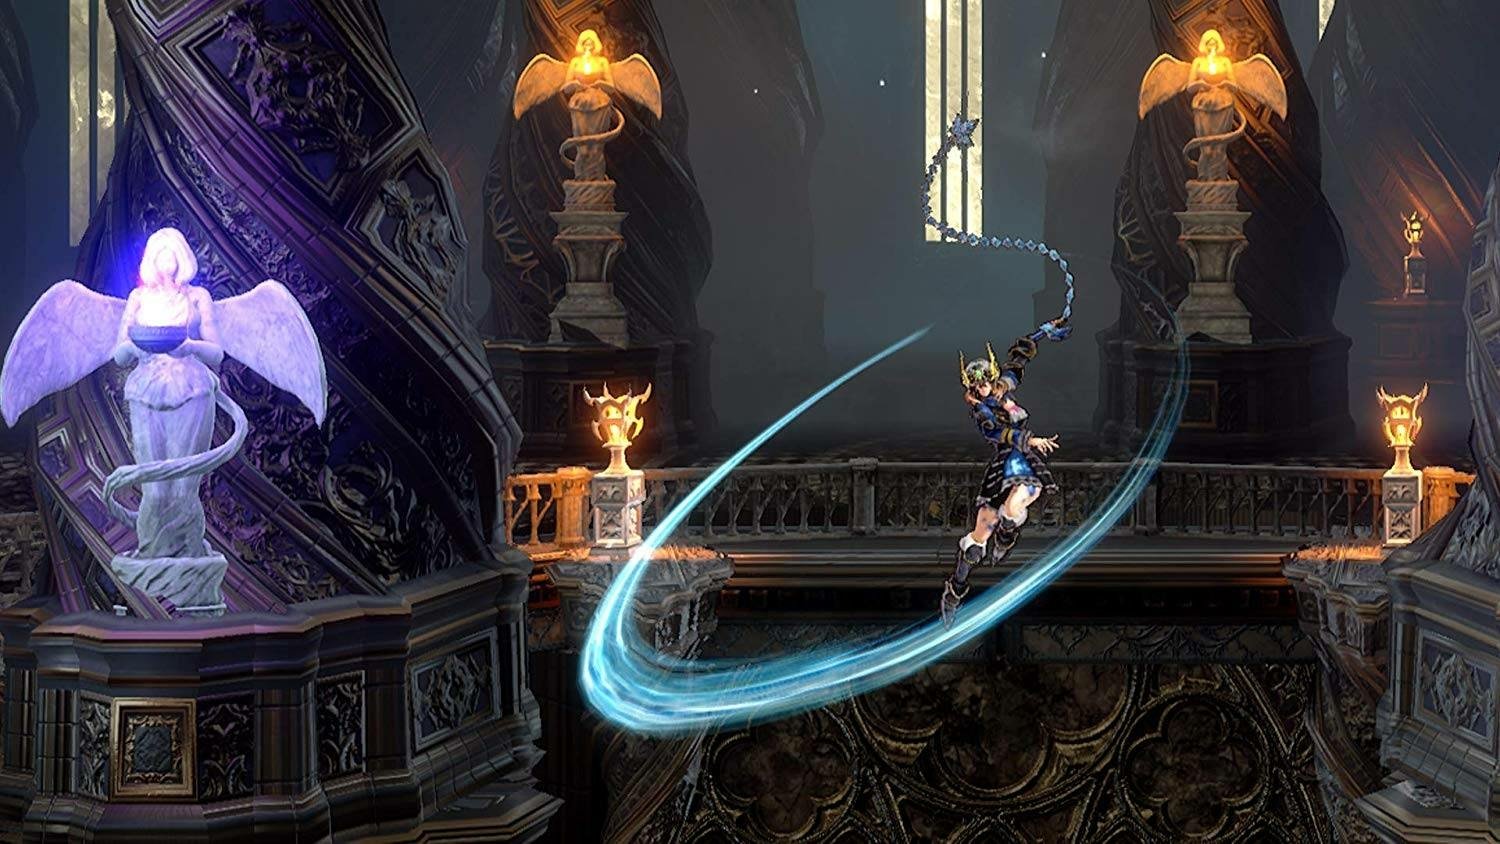 In-game screenshot from Bloodstained: Ritual of the Night showing the main character wielding a magical whip with a blue trail in a gothic cathedral environment.